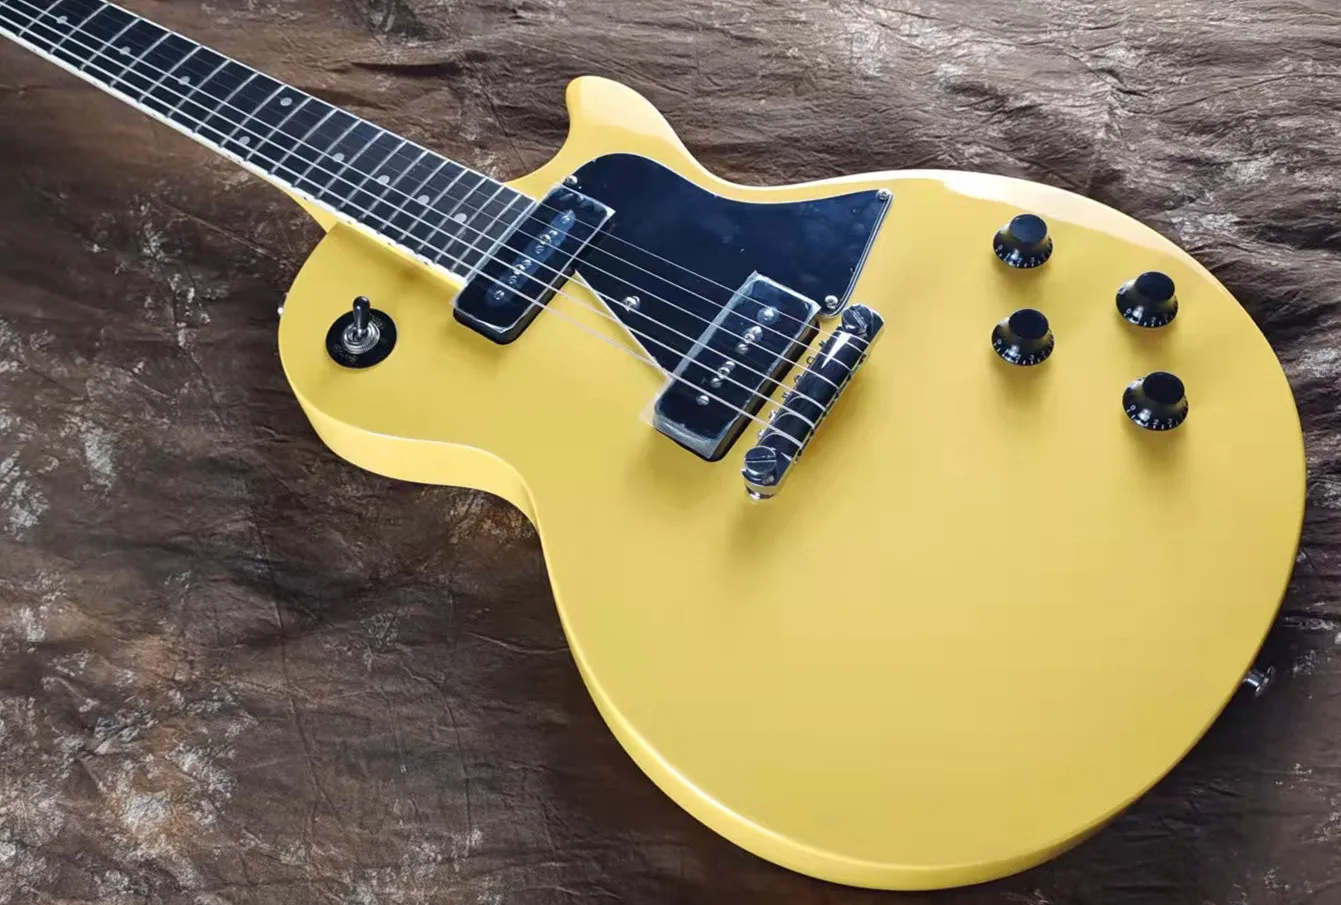 

Standard electric guitar, TV yellow, black P90 pickup, retro tuner, available in stock, quick shipping